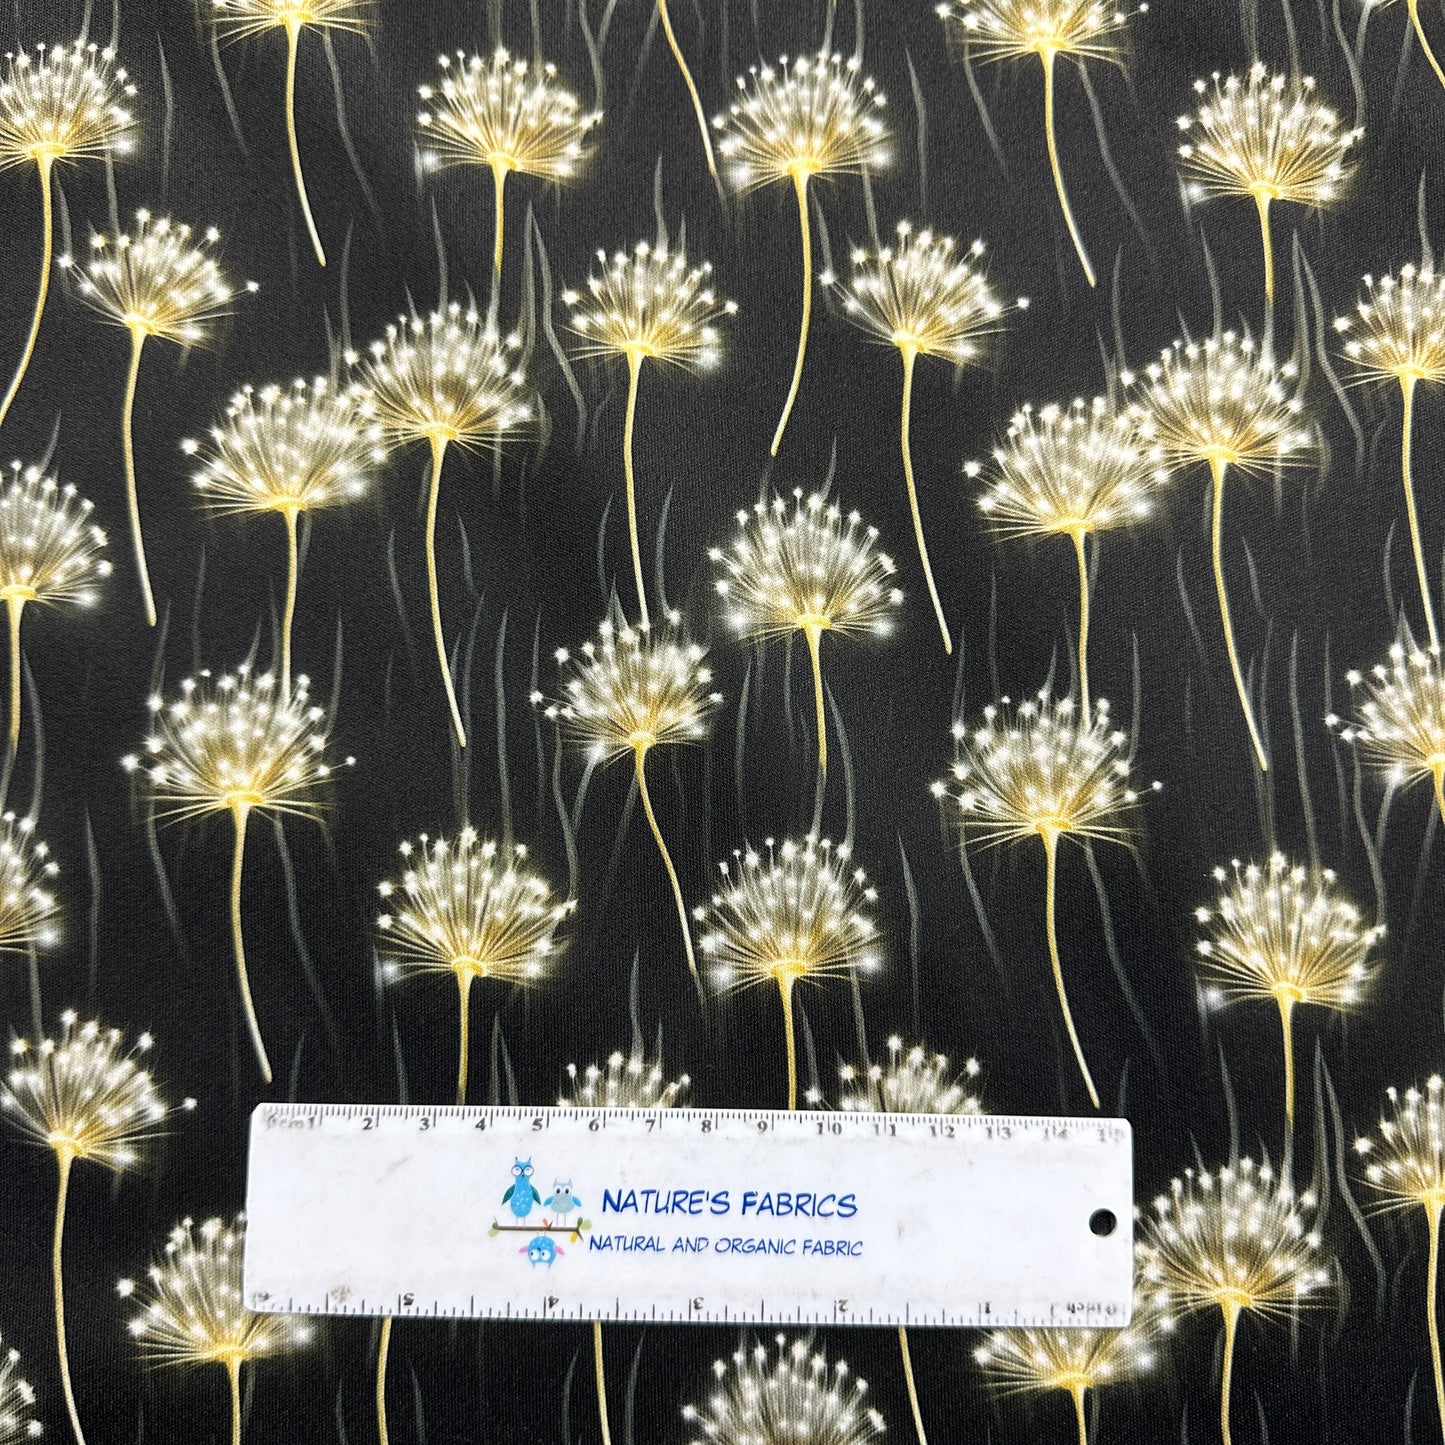 Dandelions on Black 1 mil PUL Fabric - Made in the USA